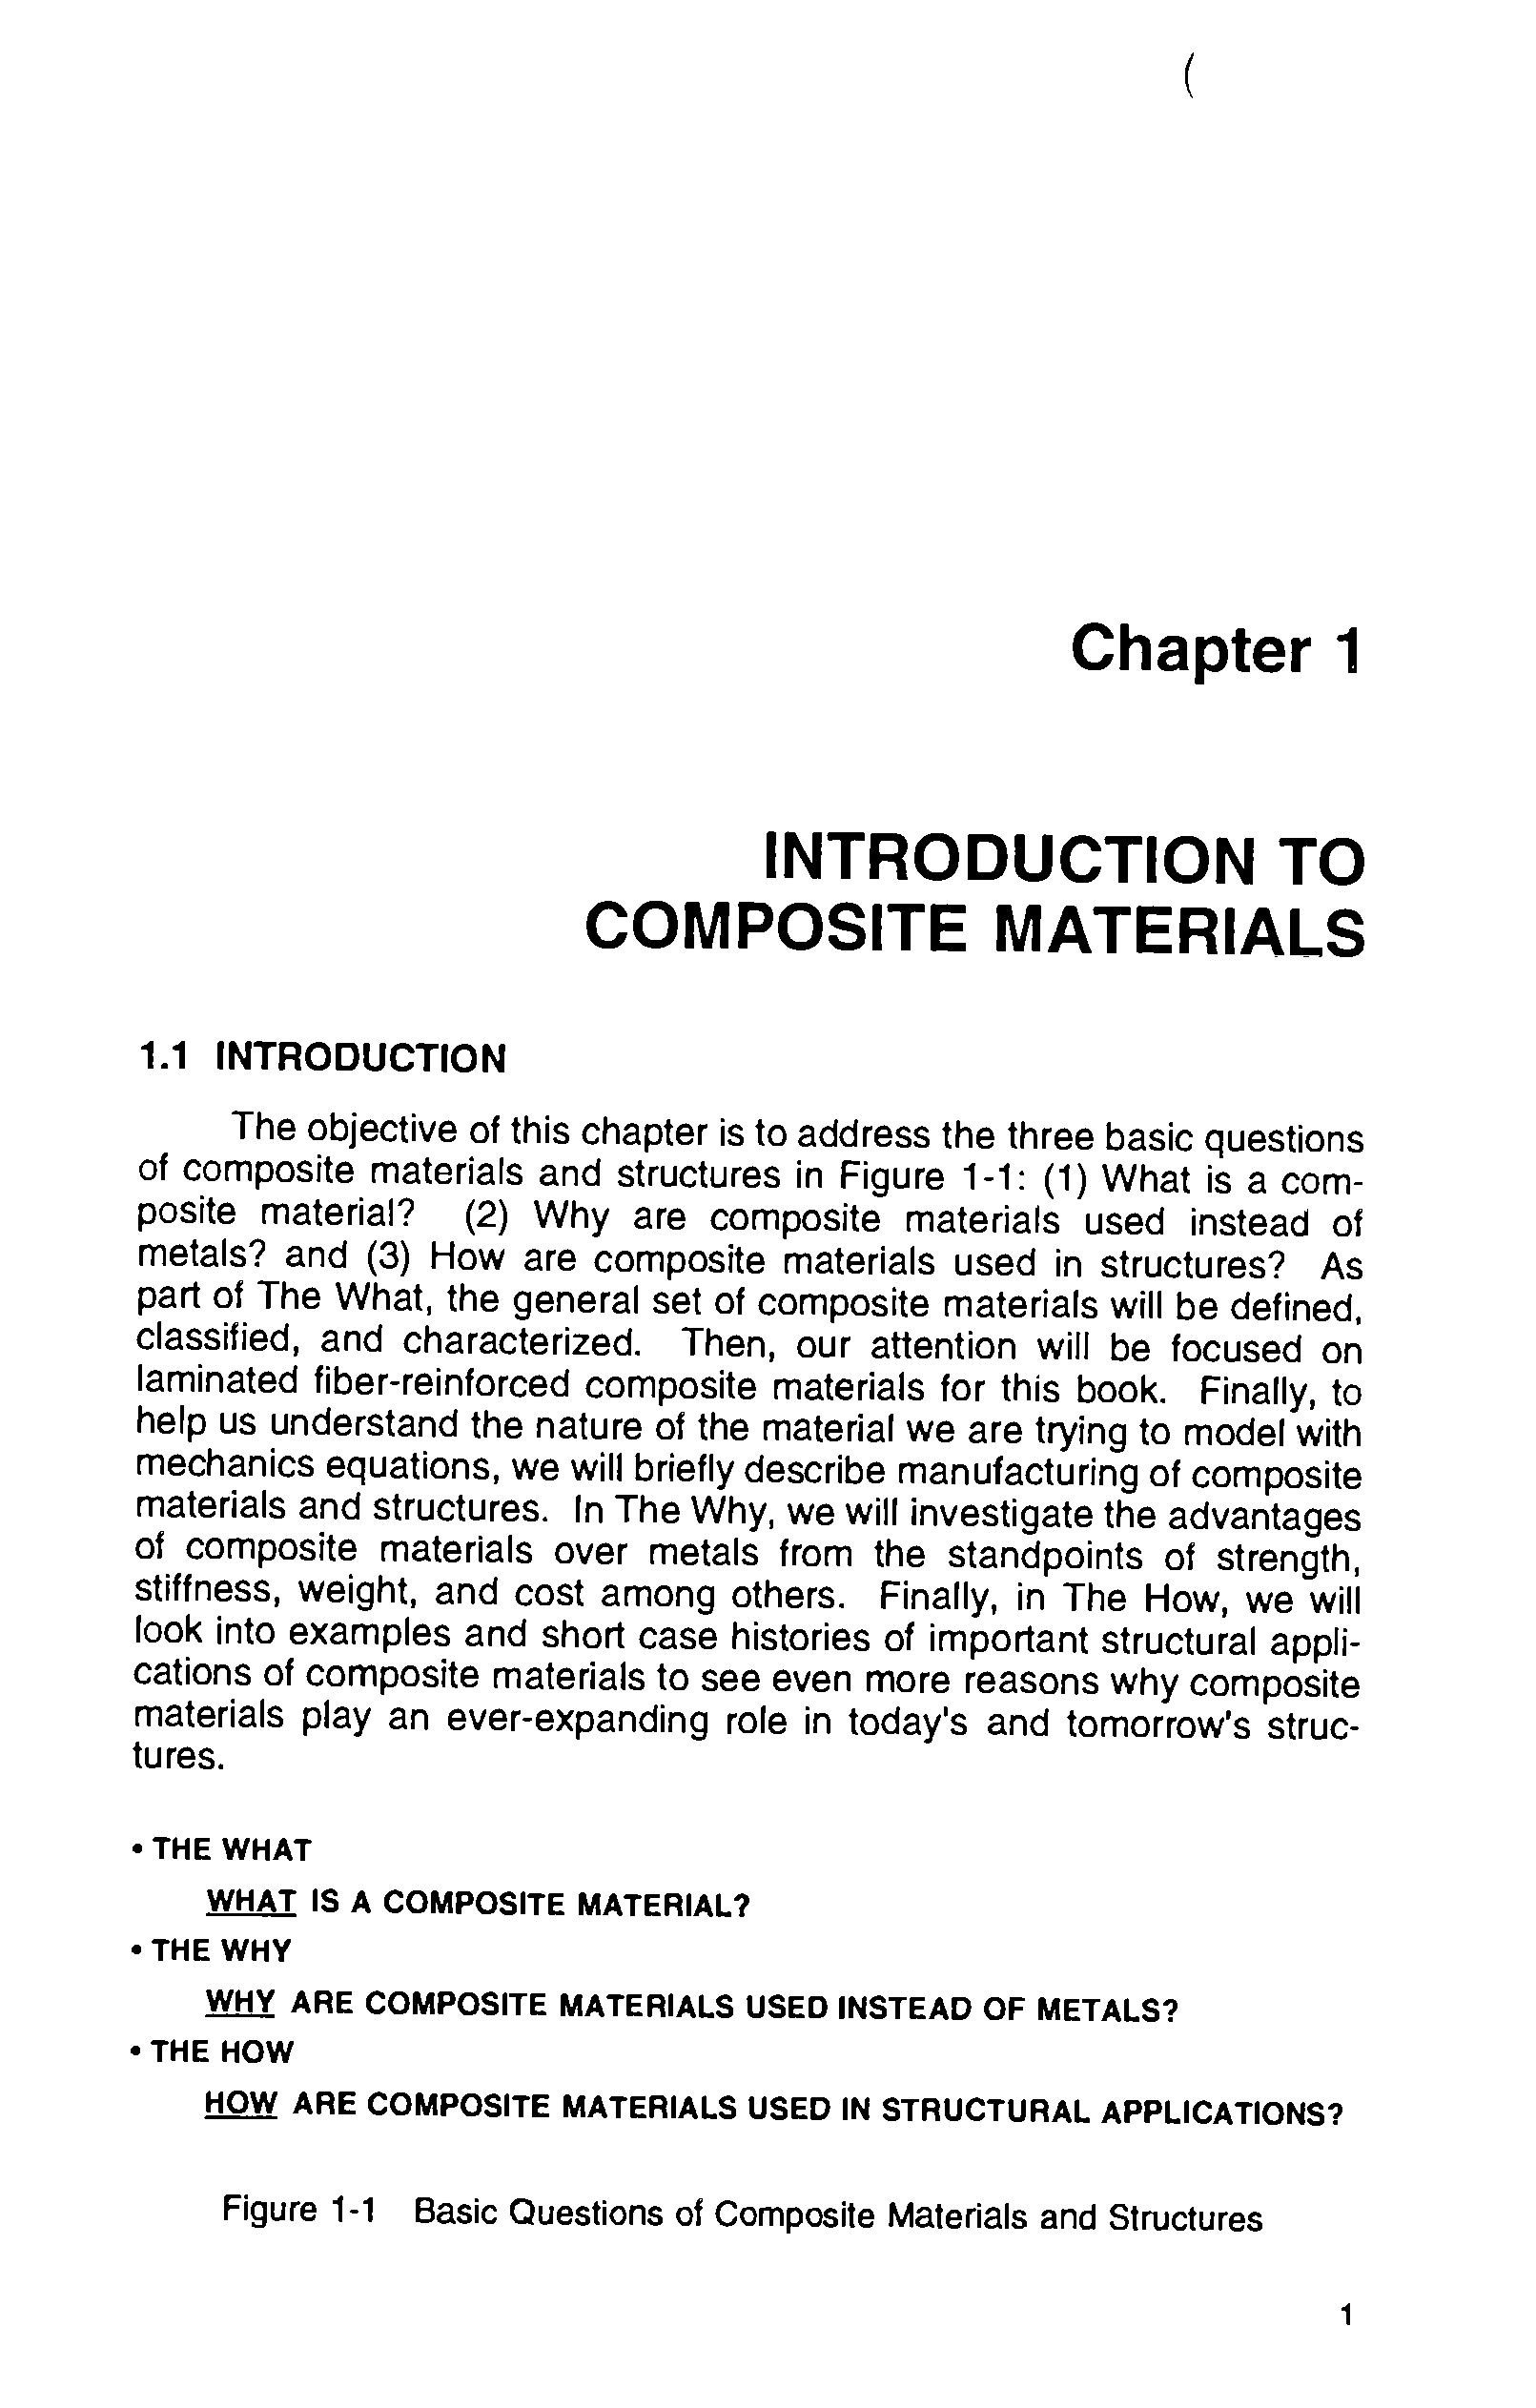 Figure 1-1 Basic Questions of Composite Materials and Structures...